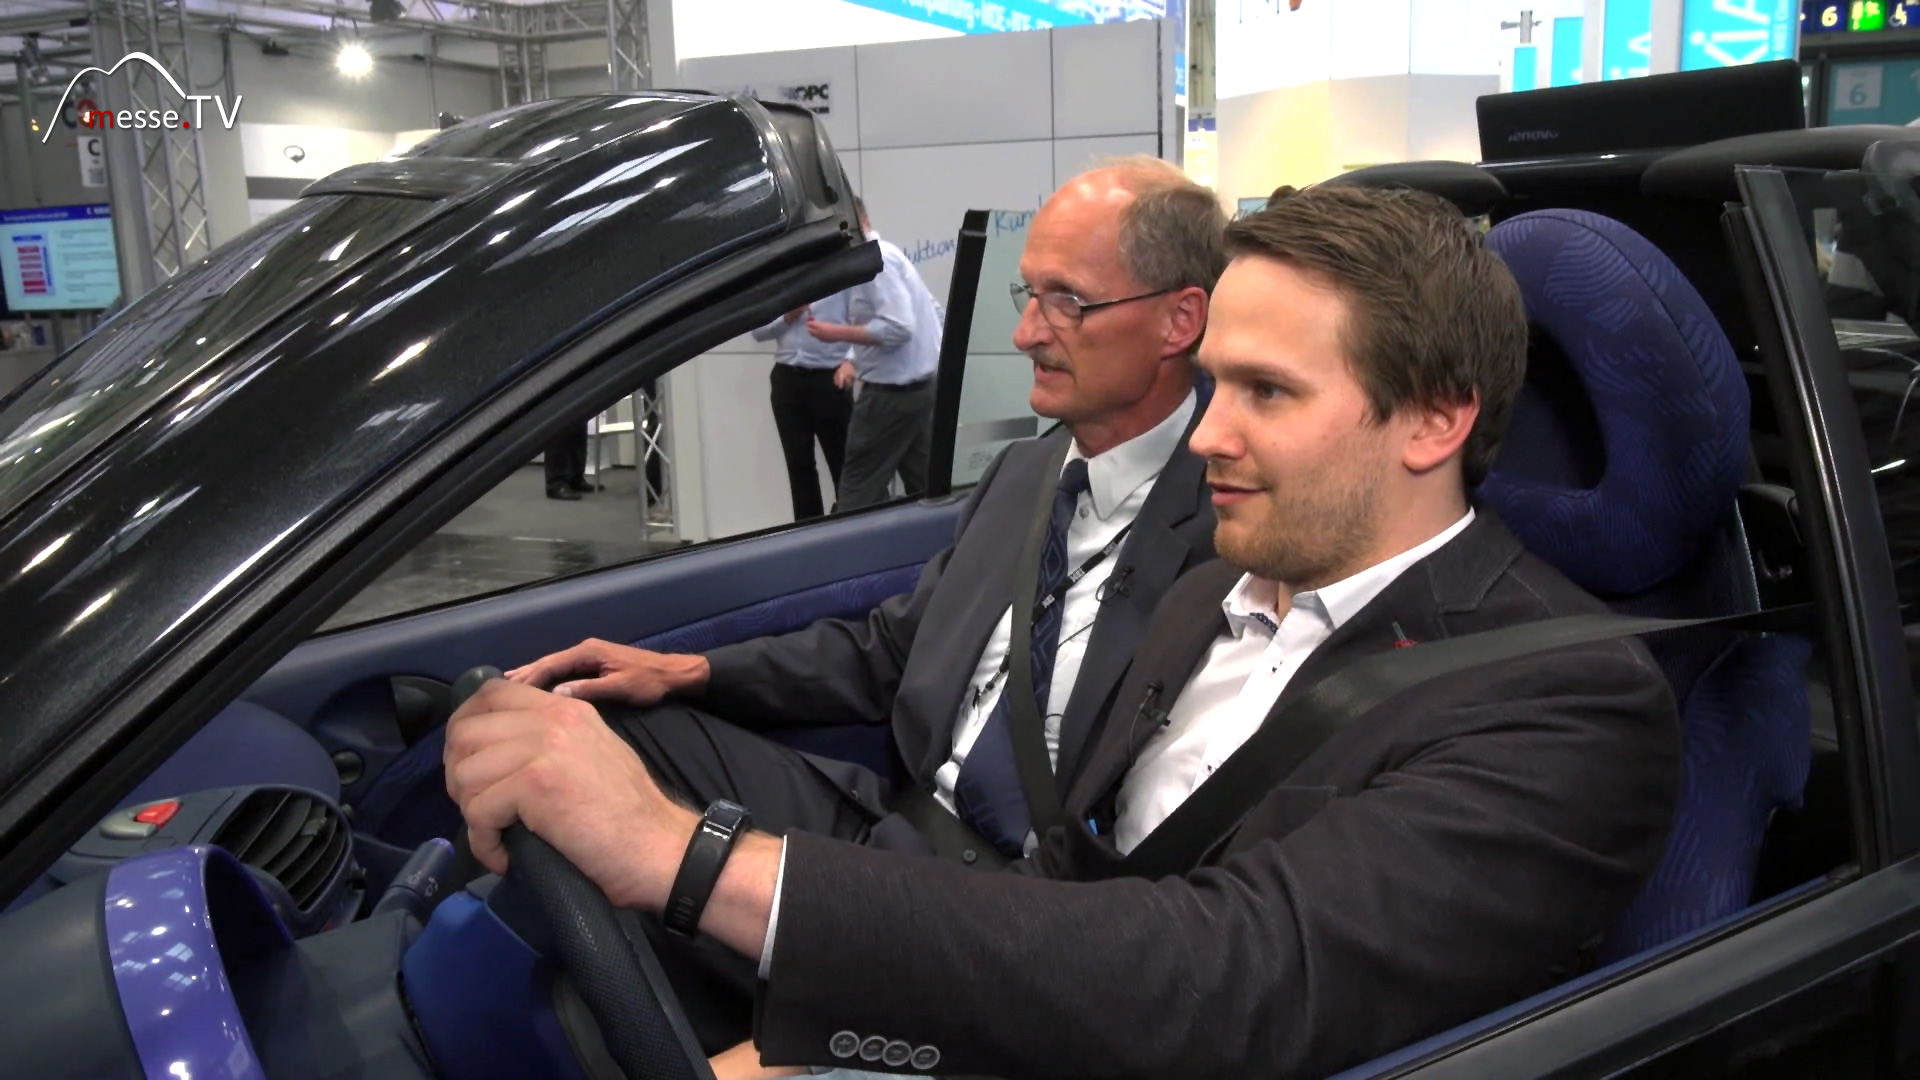 MesseTV Interview Dr Thomas Wedel in IBM driving simulator Hannover Fair